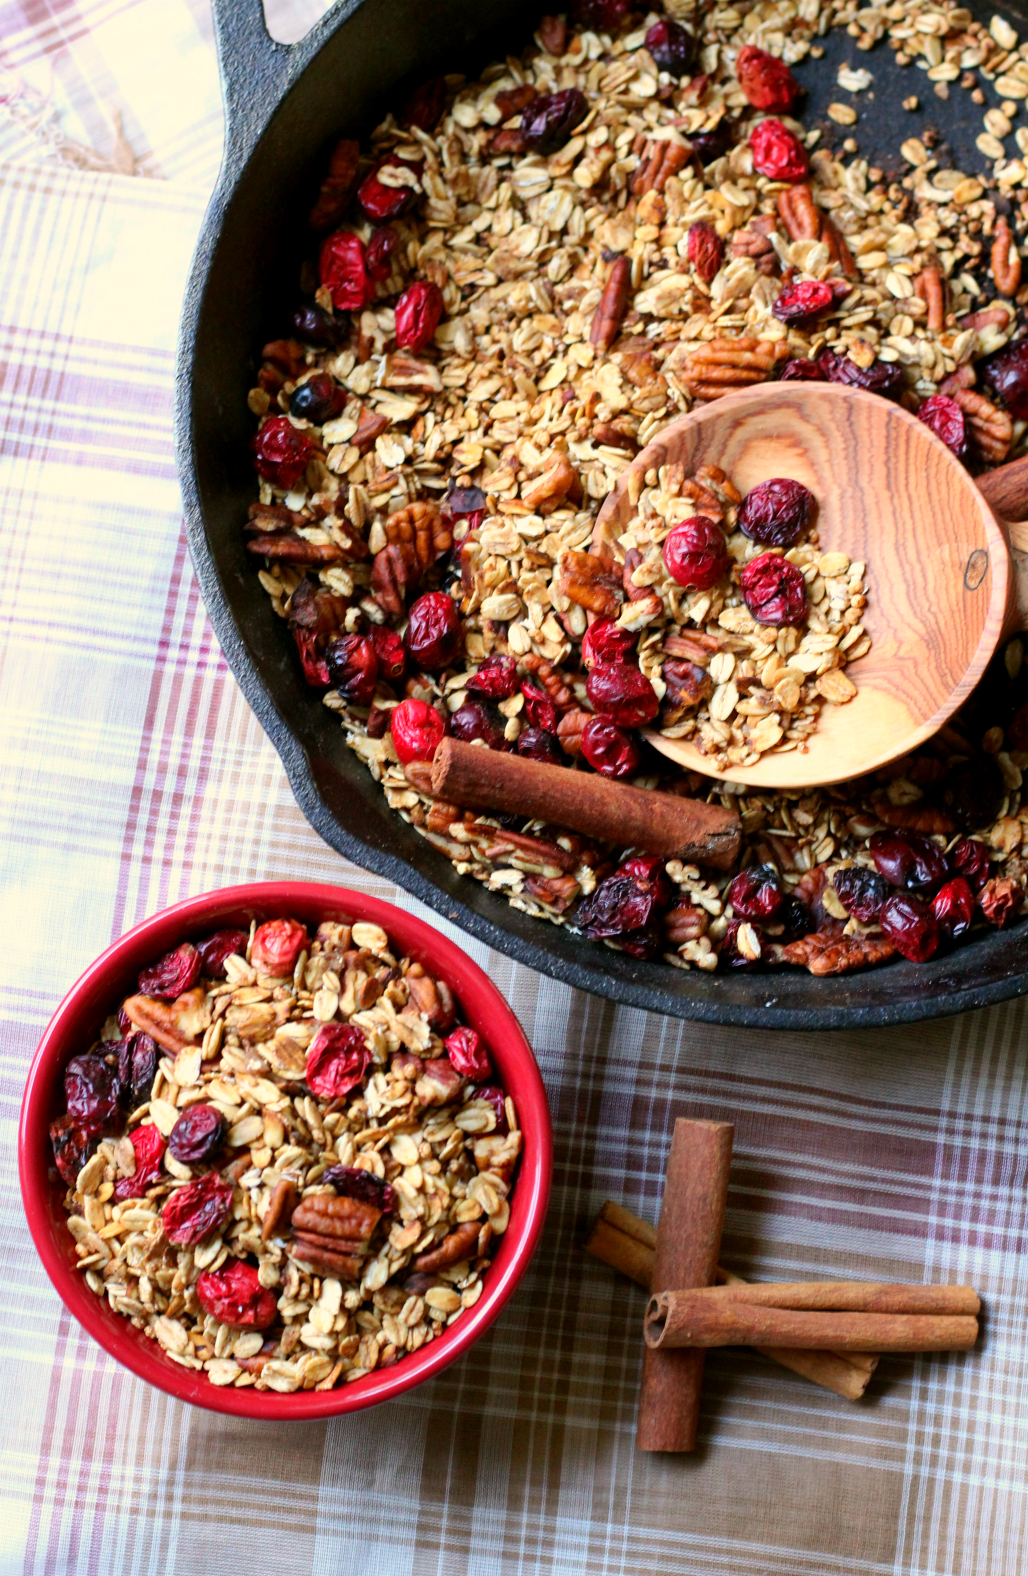 Cranberry Pecan Spiced Skillet Granola | Strength and Sunshine @RebeccaGF666 Bring the scents of cozy warmth and cheer to you home by making this stove-top cranberry pecan spicy skillet granola. Gluten-free and vegan, the perfect healthy treat to munch on, morning, noon, or night! Makes a great breakfast, snack, or homemade gift!